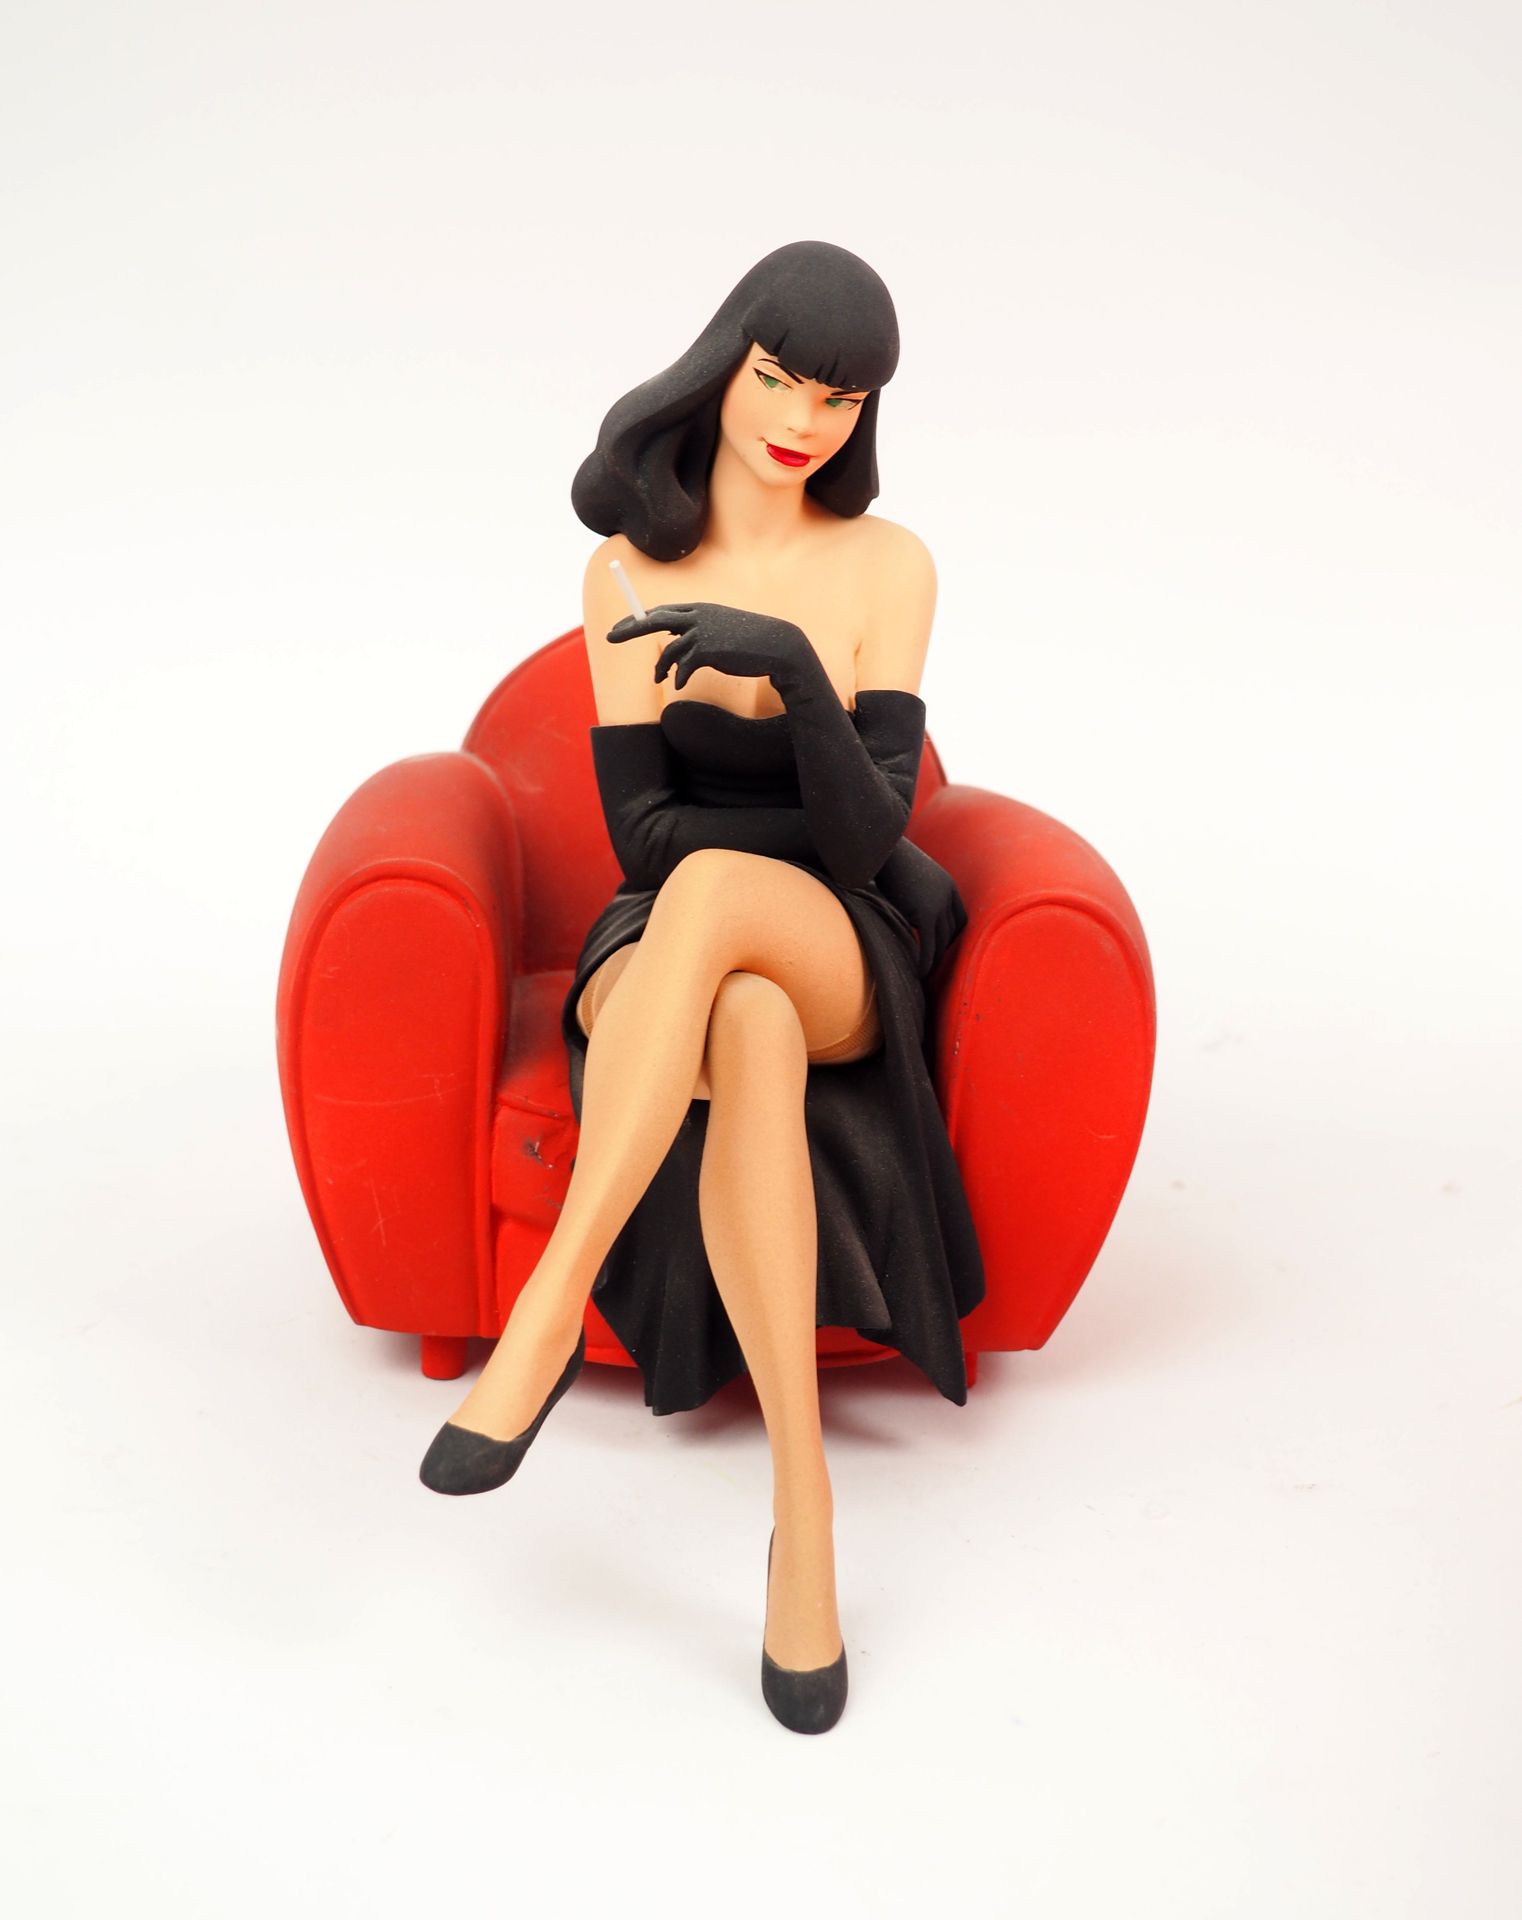 Null BERTHET
Pin Up on the chair
Statuette edited by Fariboles, limited edition &hellip;